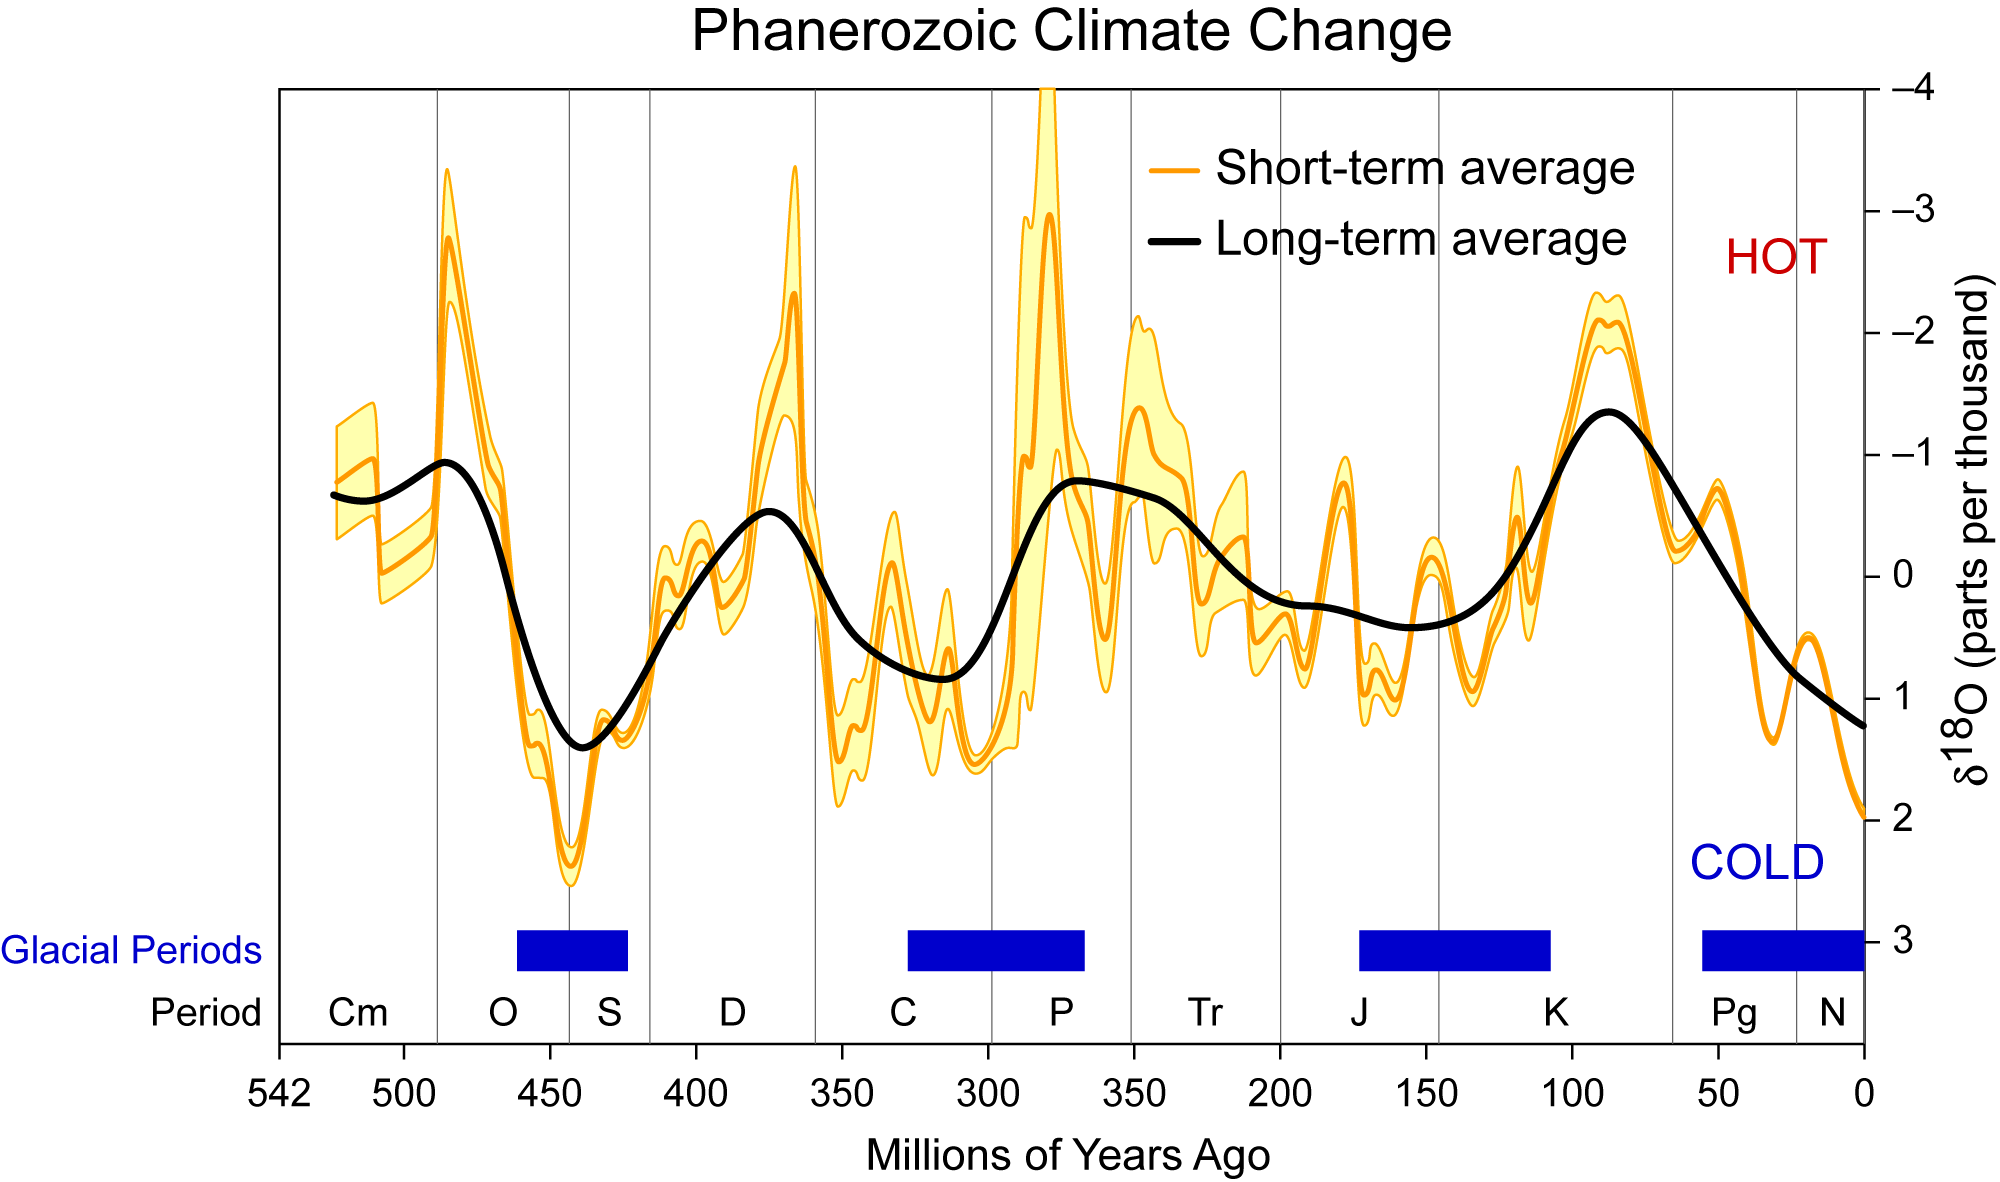 Diagram showing global temperature fluctuations and periods of glaciation over the course of the Phanerozoic.